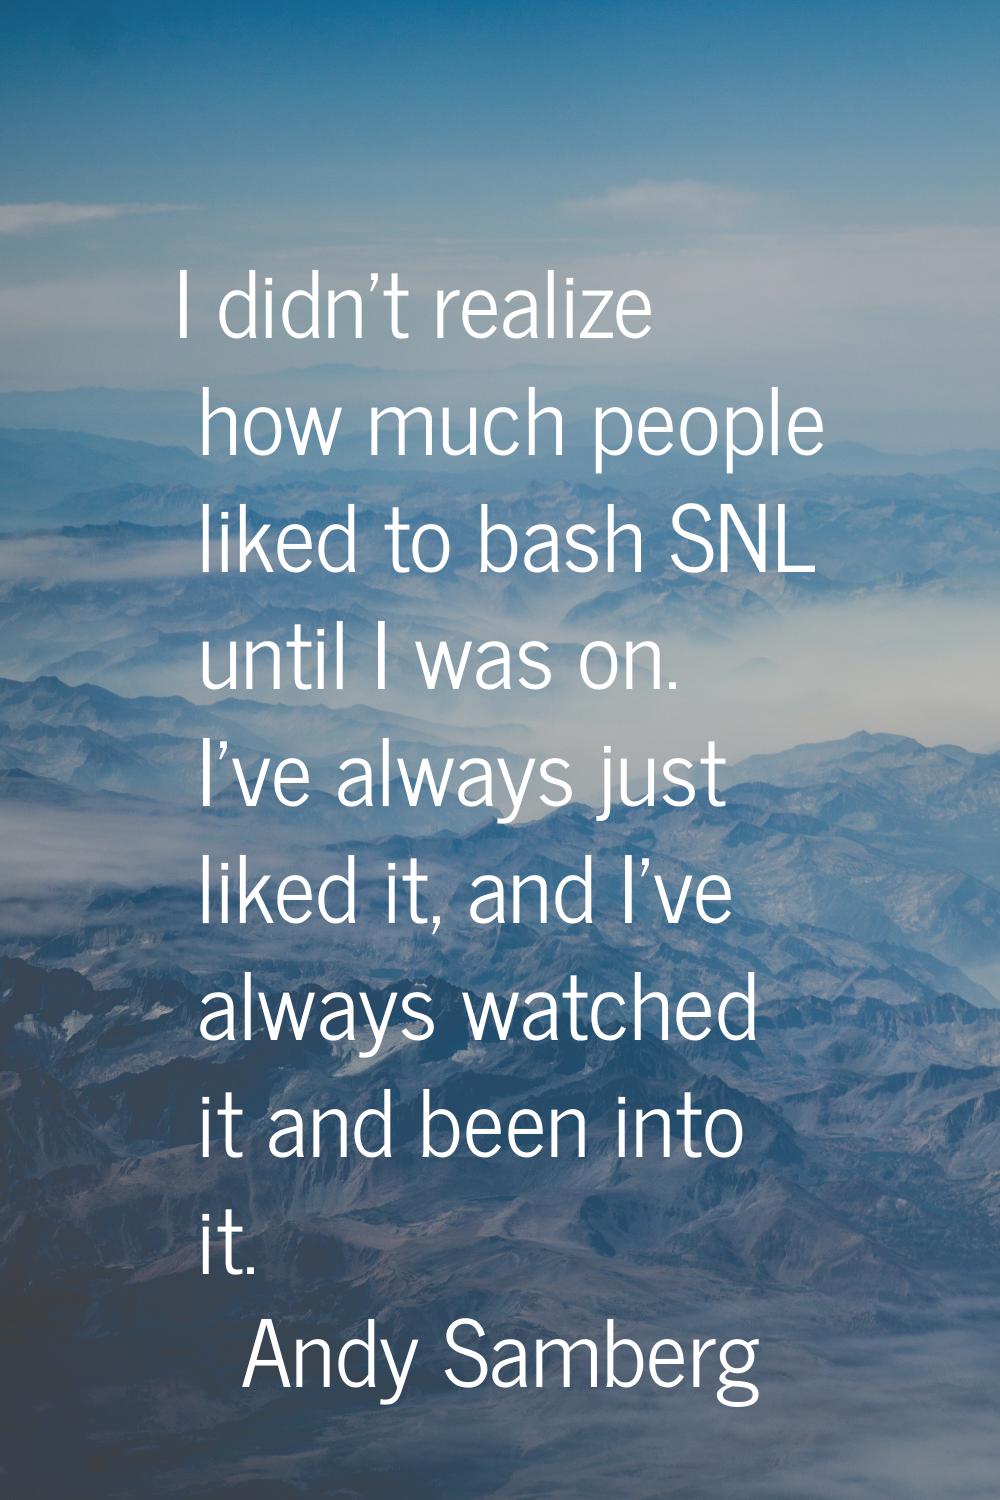 I didn't realize how much people liked to bash SNL until I was on. I've always just liked it, and I